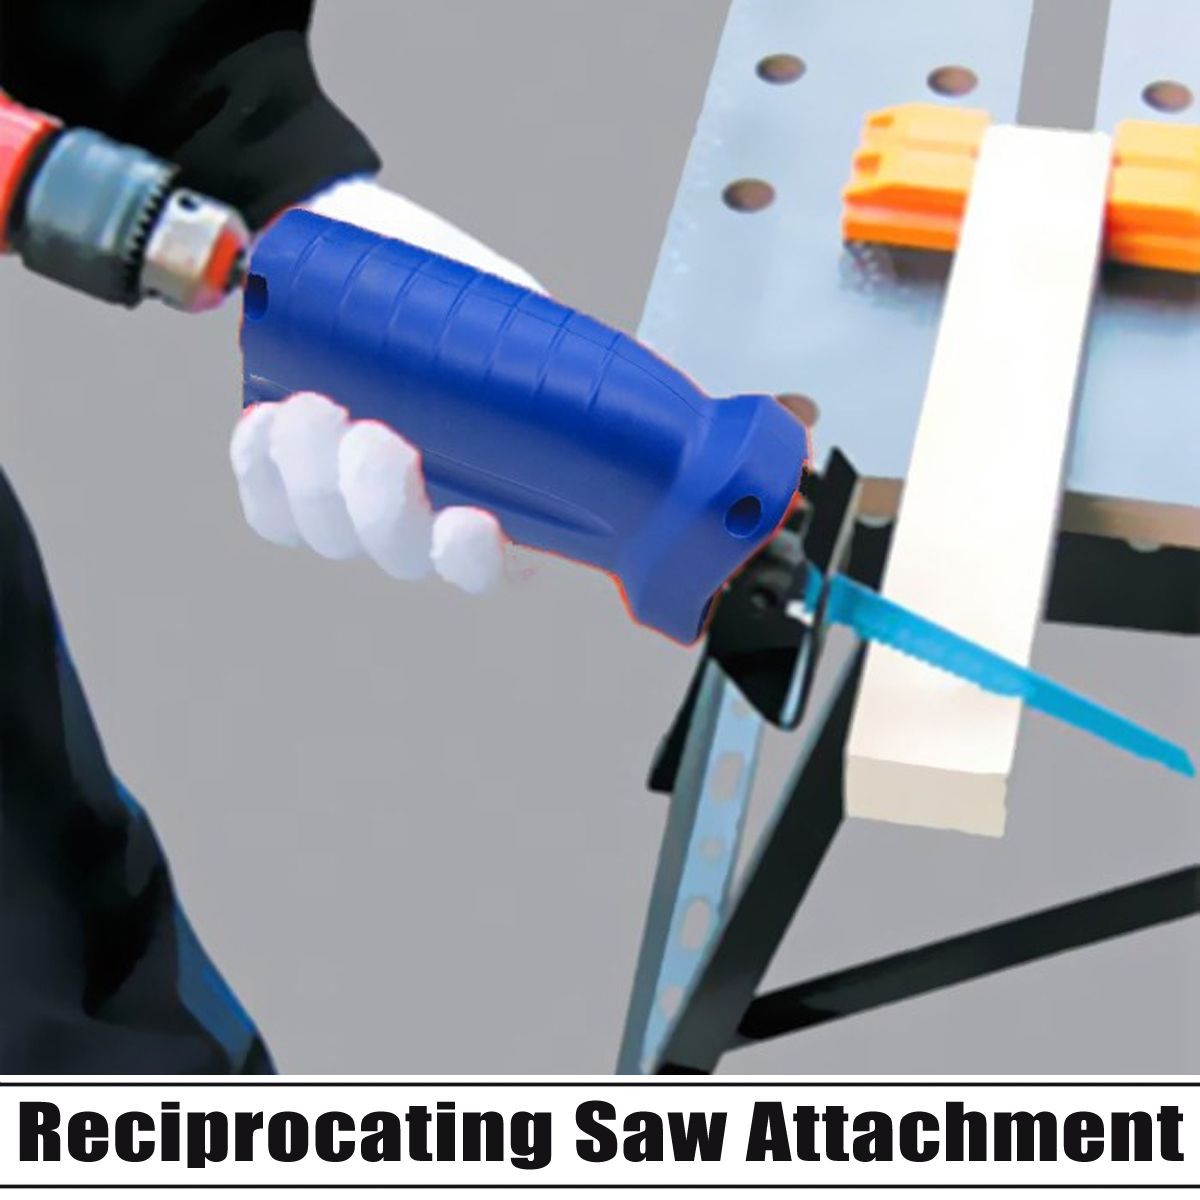 Reciprocating-Saw-Convert-Adapter-Woodworking-Chainsaw-For-Cordless-Power-Drill-1375038